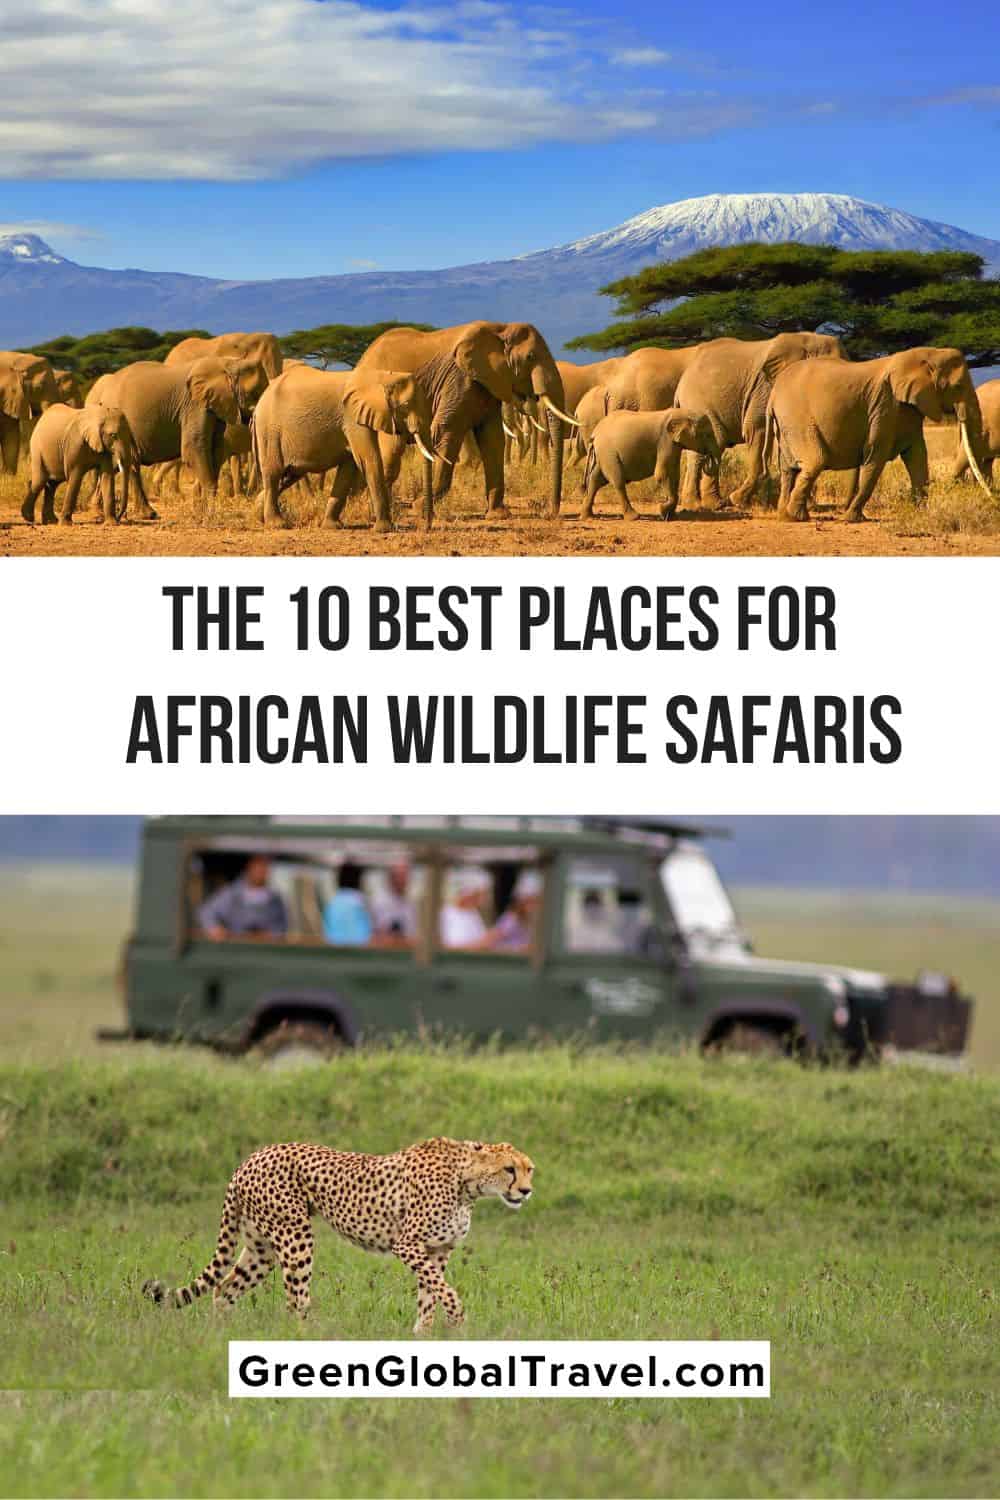 10 of the best places for African safari tours, from Kenya & Tanzania to up-and-coming ecotourism hotspots like Malawi, Namibia, and Rwanda. | best safari in africa | safari tours in africa | safari holidays in africa | african safari holidays | safari trips in africa | african safari trips | african safari vacation | best african safari tours | east africa safaris | south africa safari tour | best african safari tour | africa safaris | african safari luxury tours | safari vacations